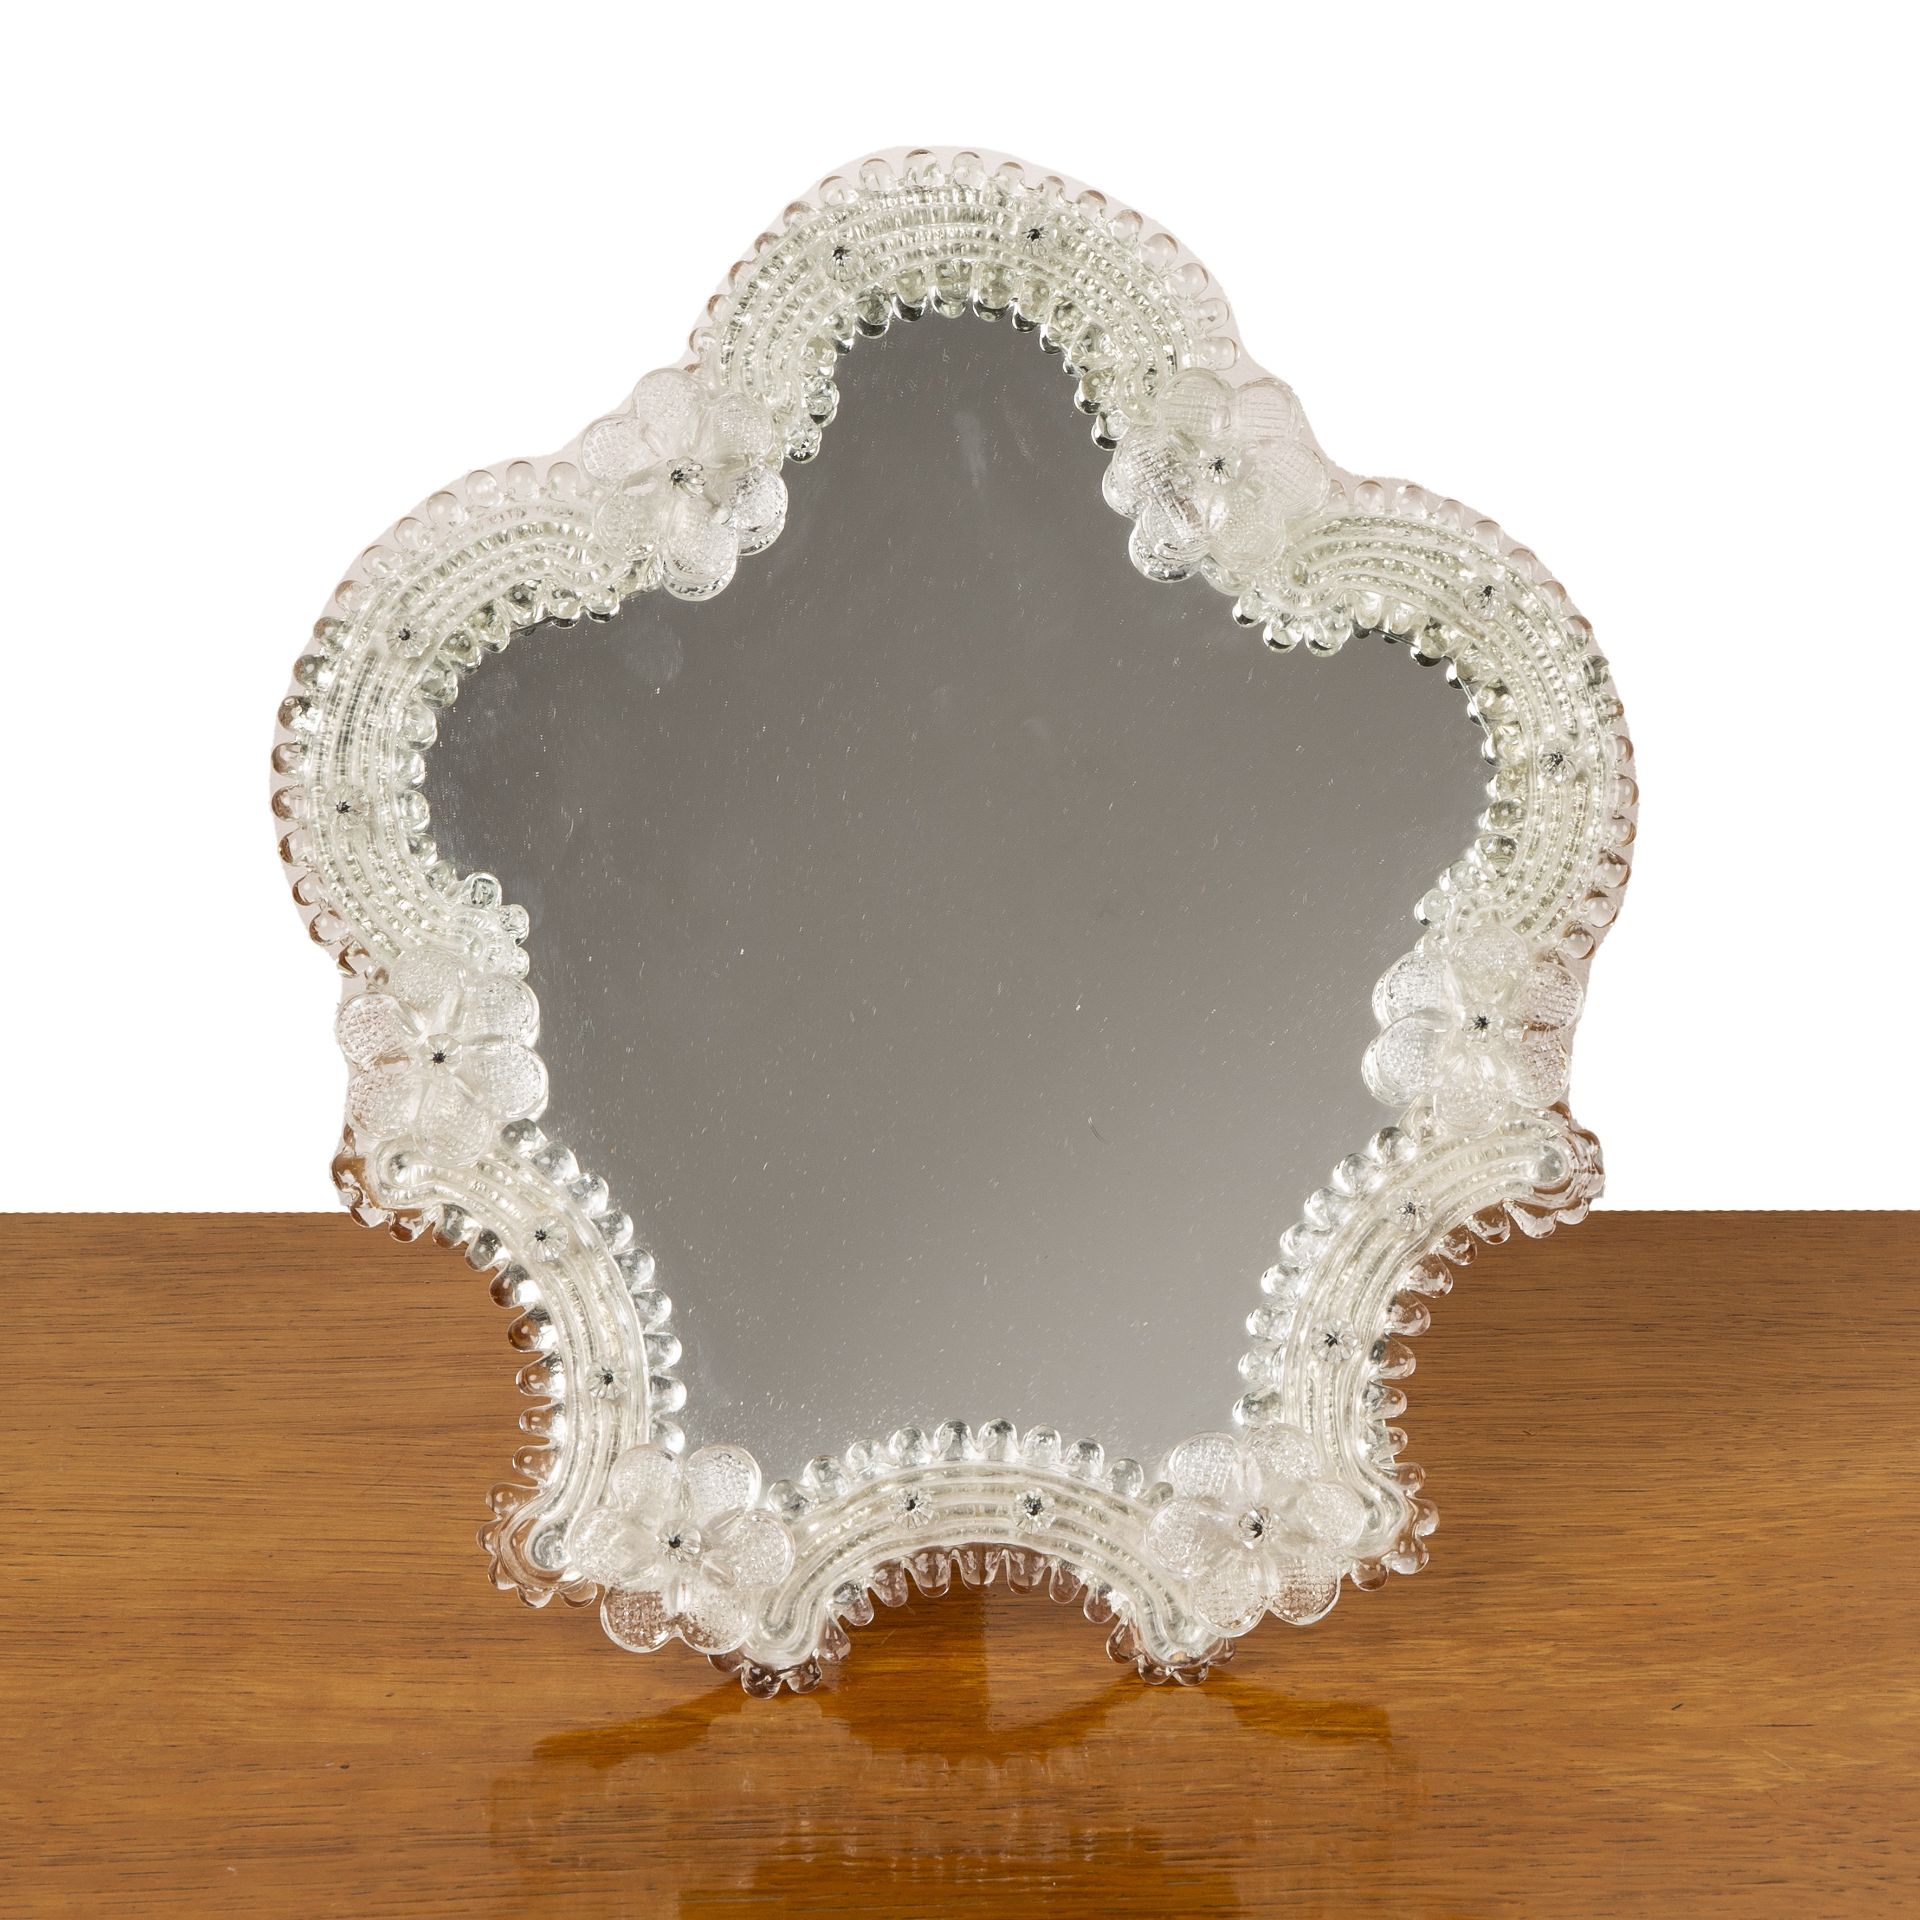 Venetian or Murano glass mirror decorated with flowers, on an easel back, 30cm high when on stand,